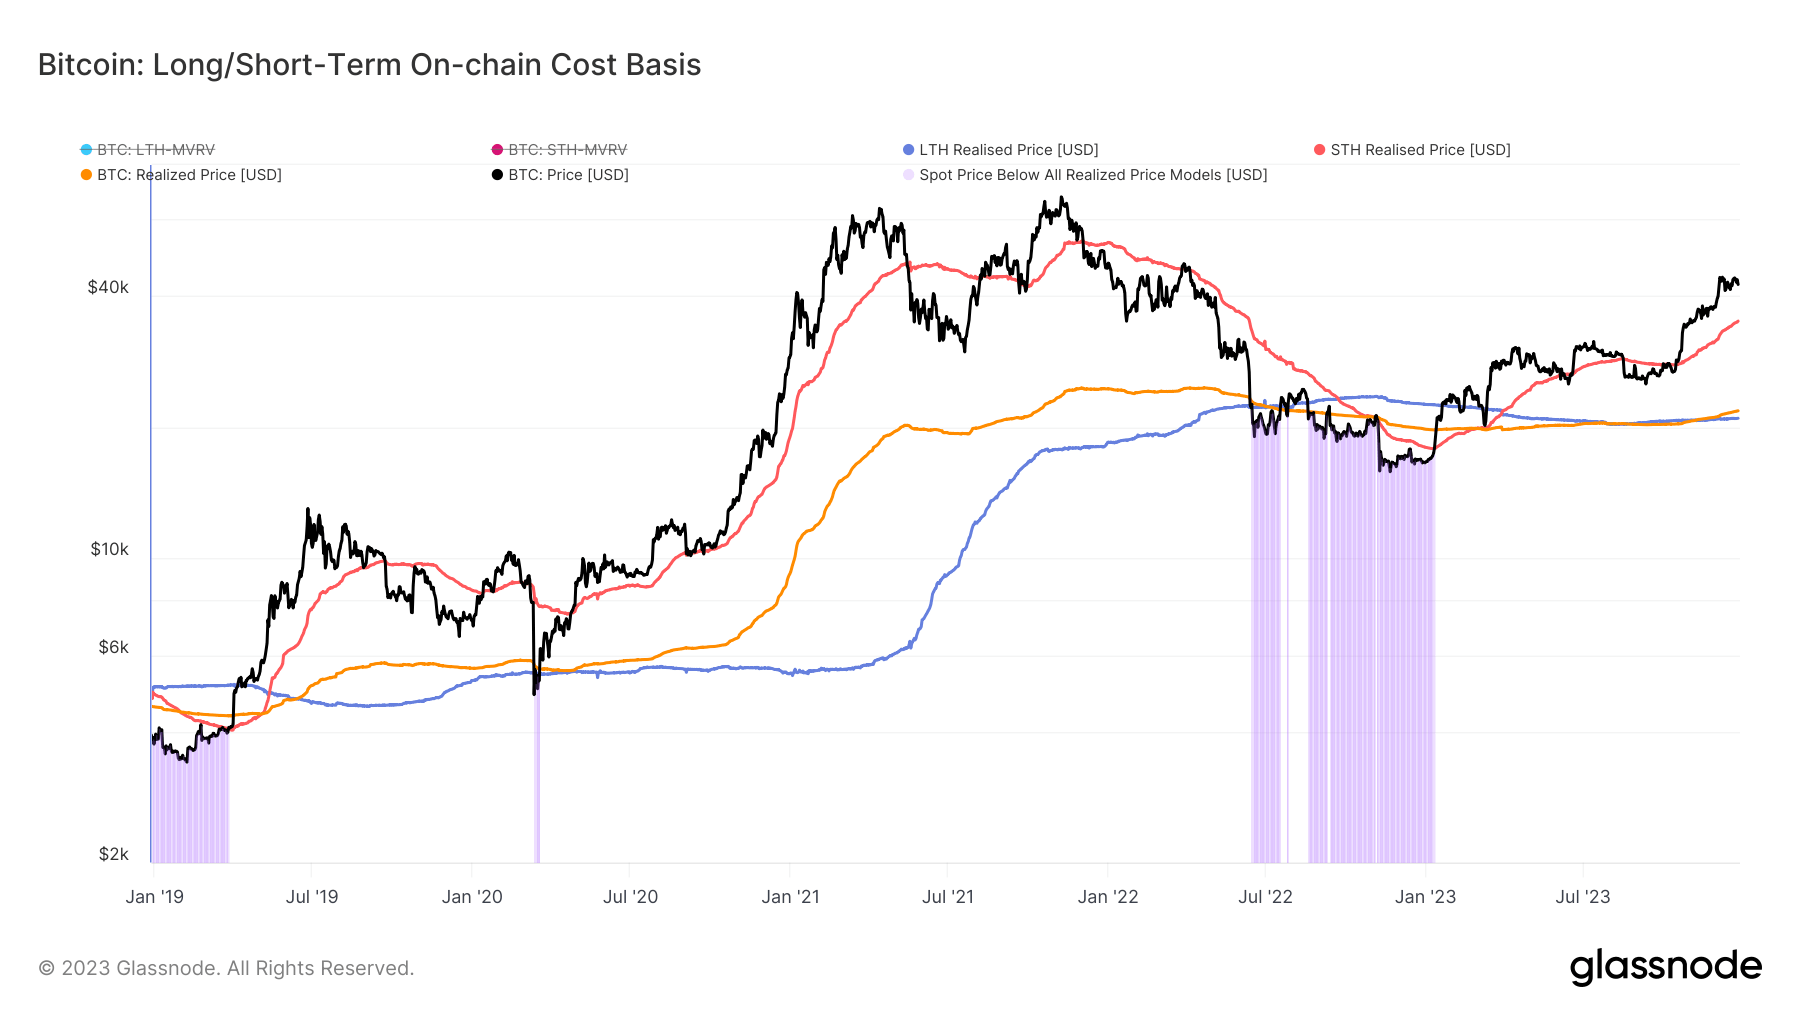 Long/Short term on chain cost basis: (Source: Glassnode)